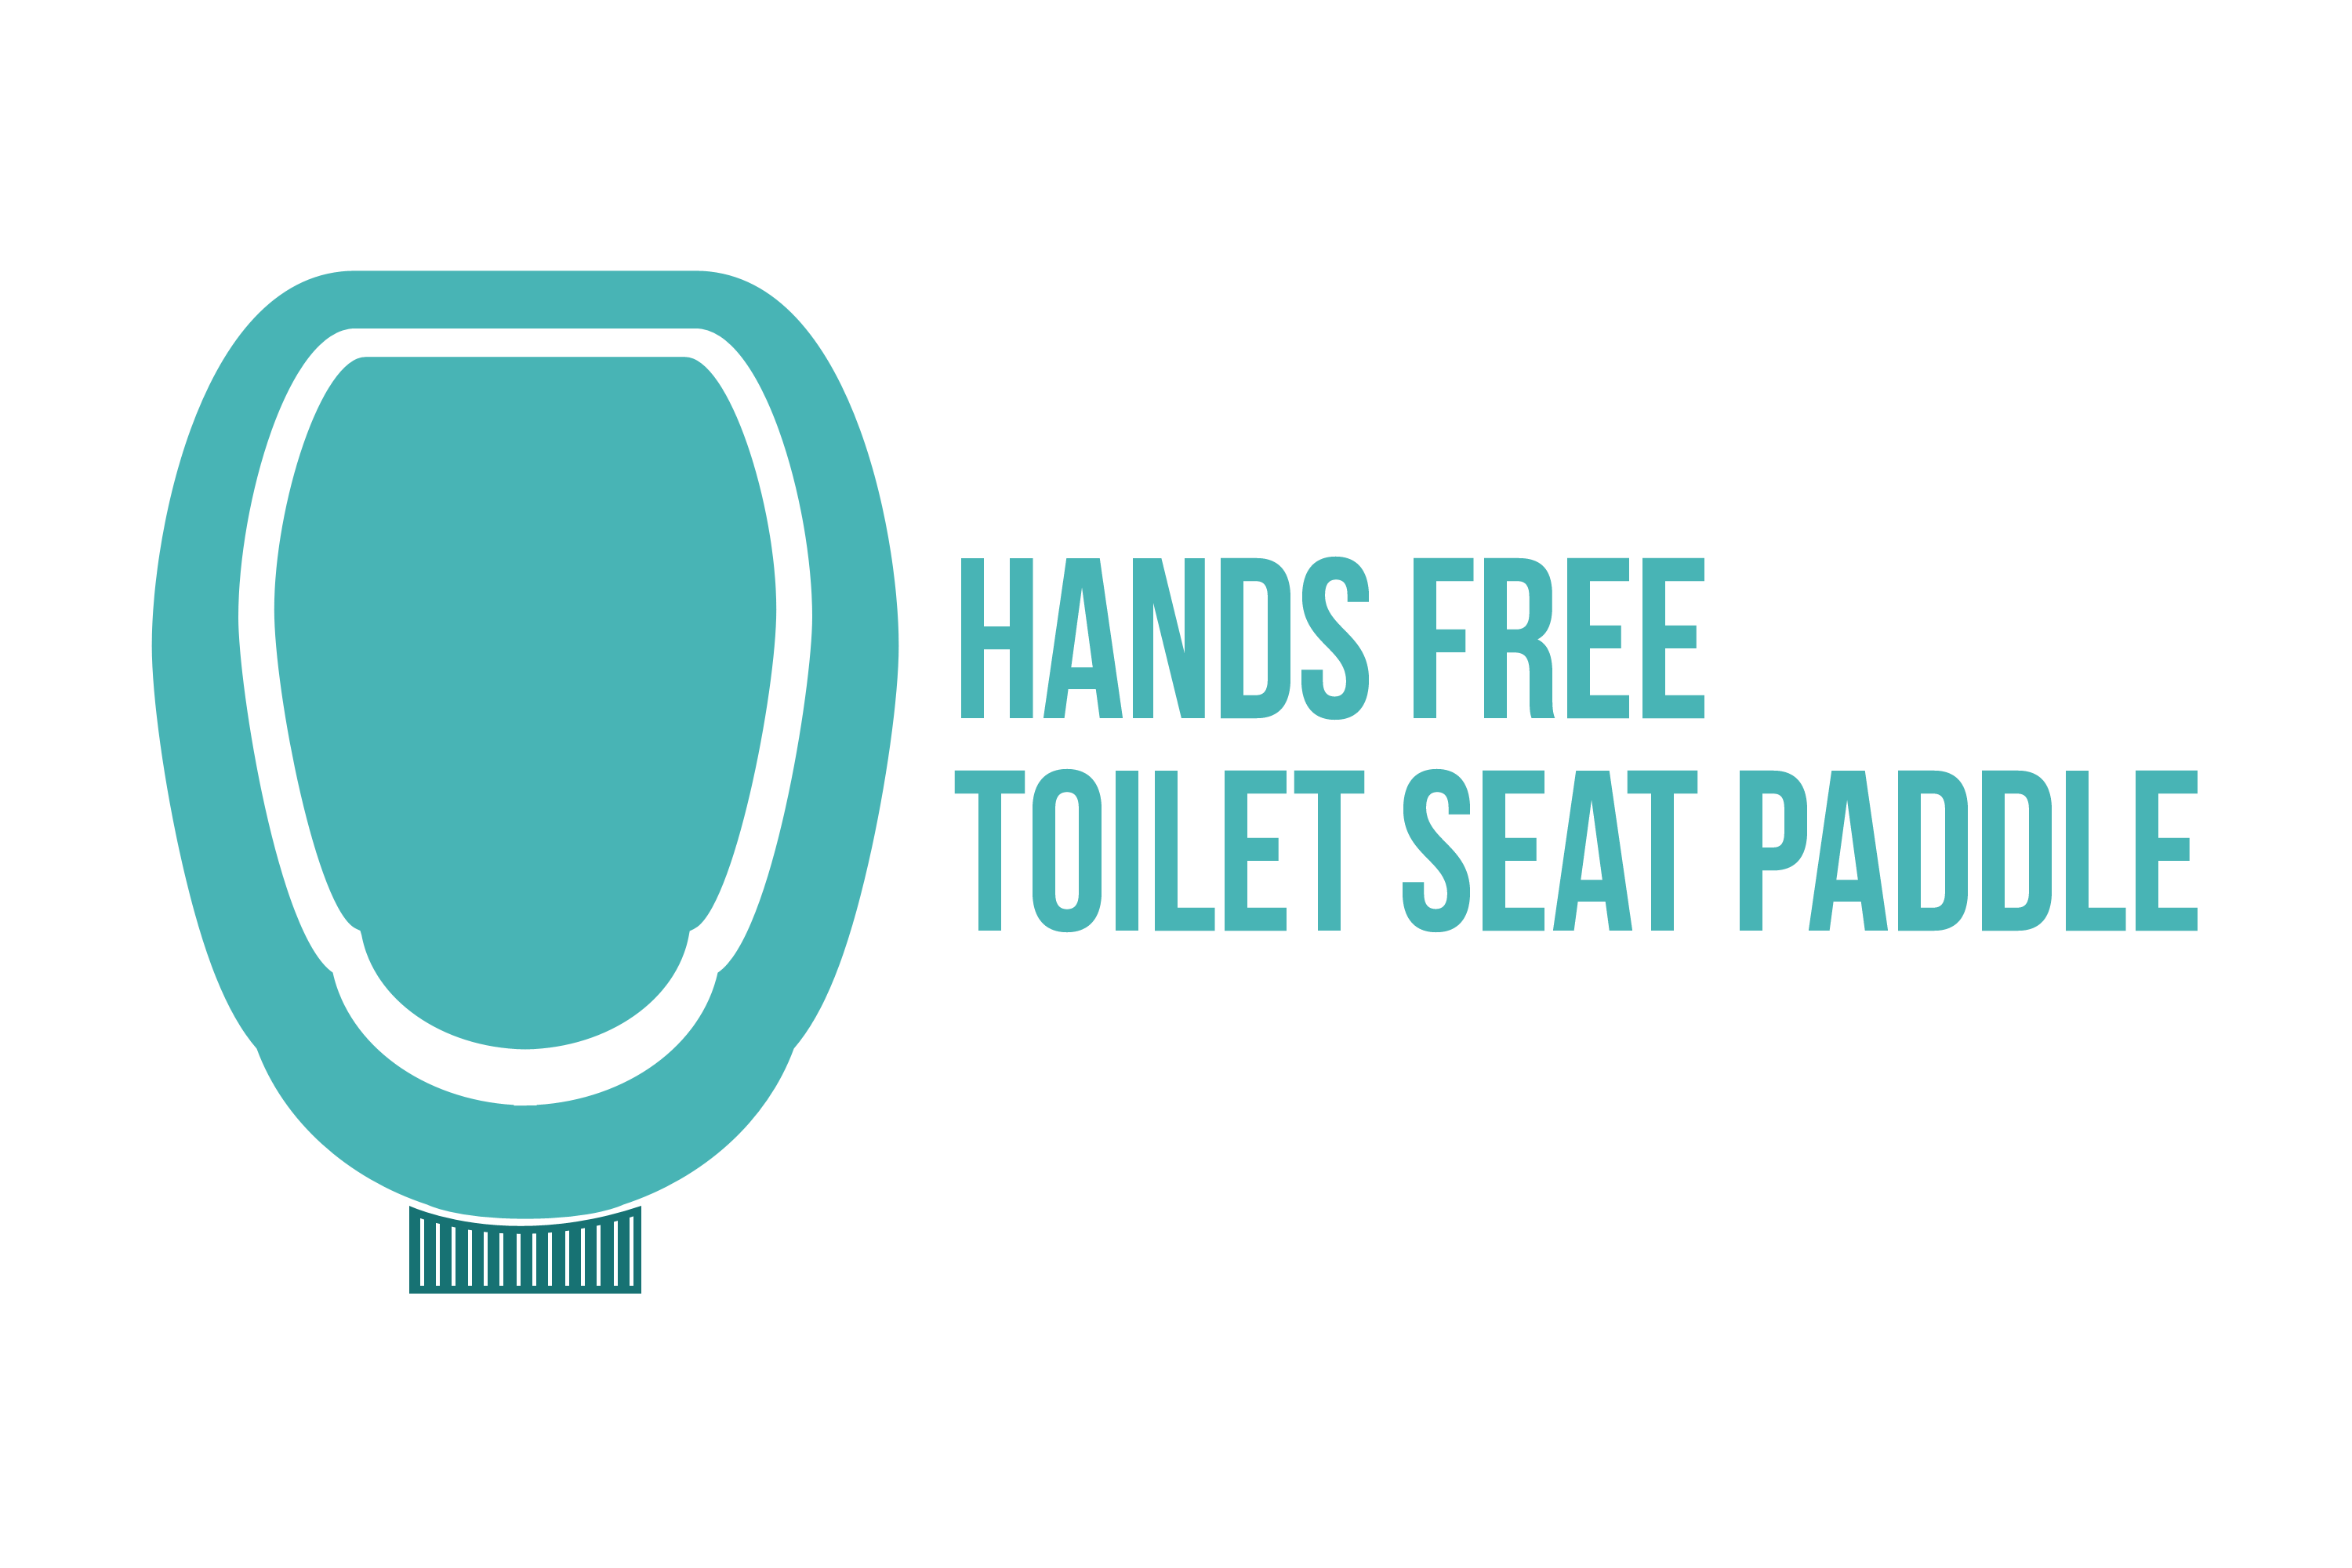 This invention will help solve that issue so people can use their toilets without having to lift up the seat with their hands.